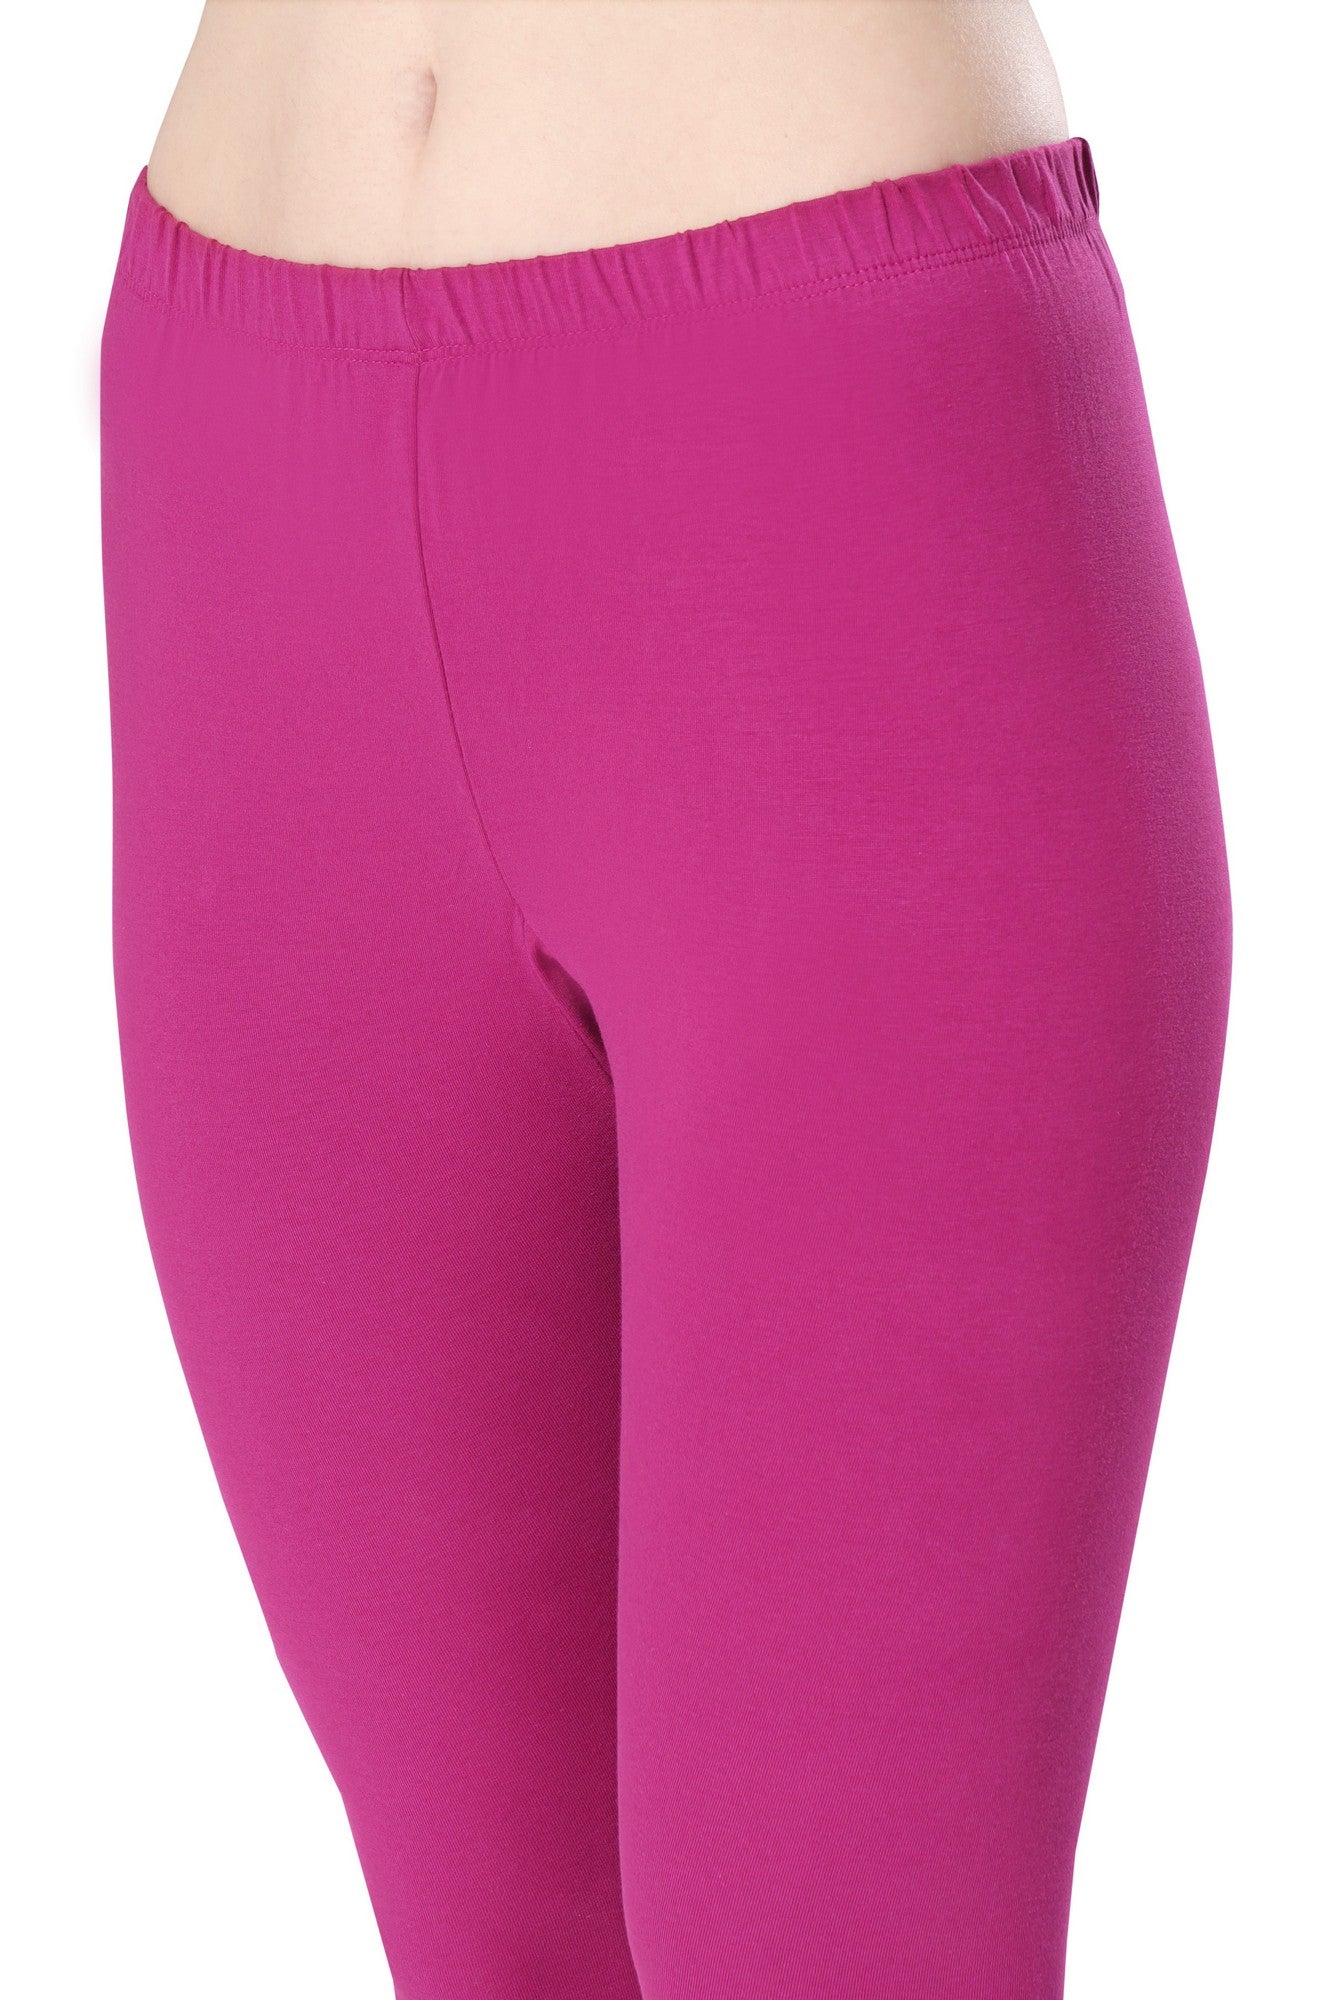 Buy KPC Dark Pink Women's Slim Fit Cotton Ankle Length Leggings Legging for  Women Sizes: S = Small Size for 24-28 inches Waist, L = Regular Size (Free  Size) for 28-36 inches